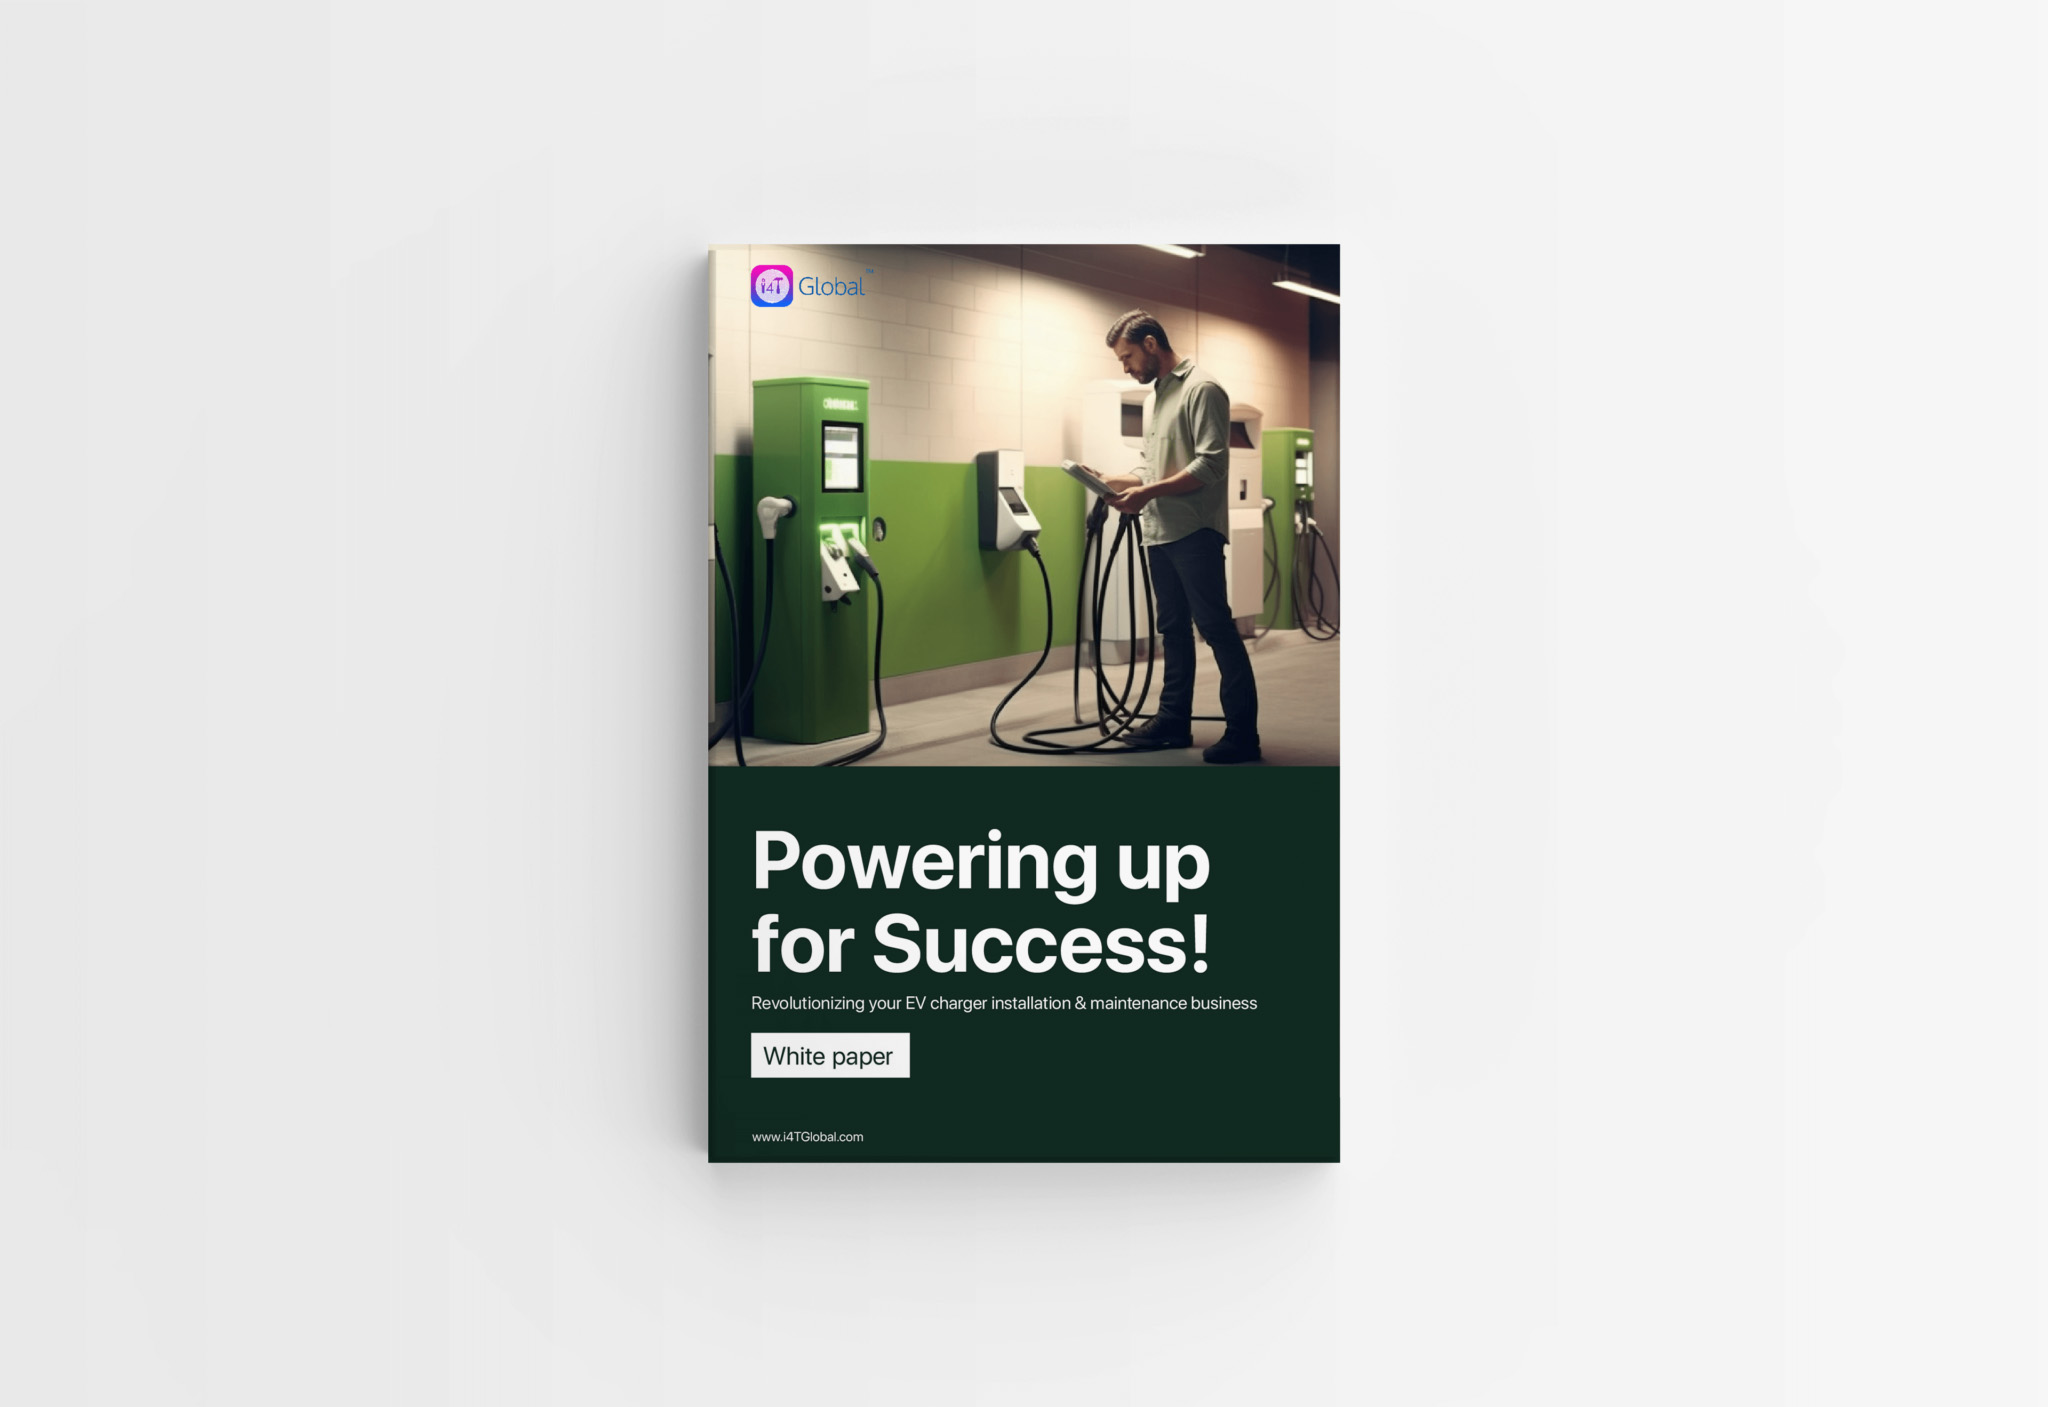 white paper download - powering up for success